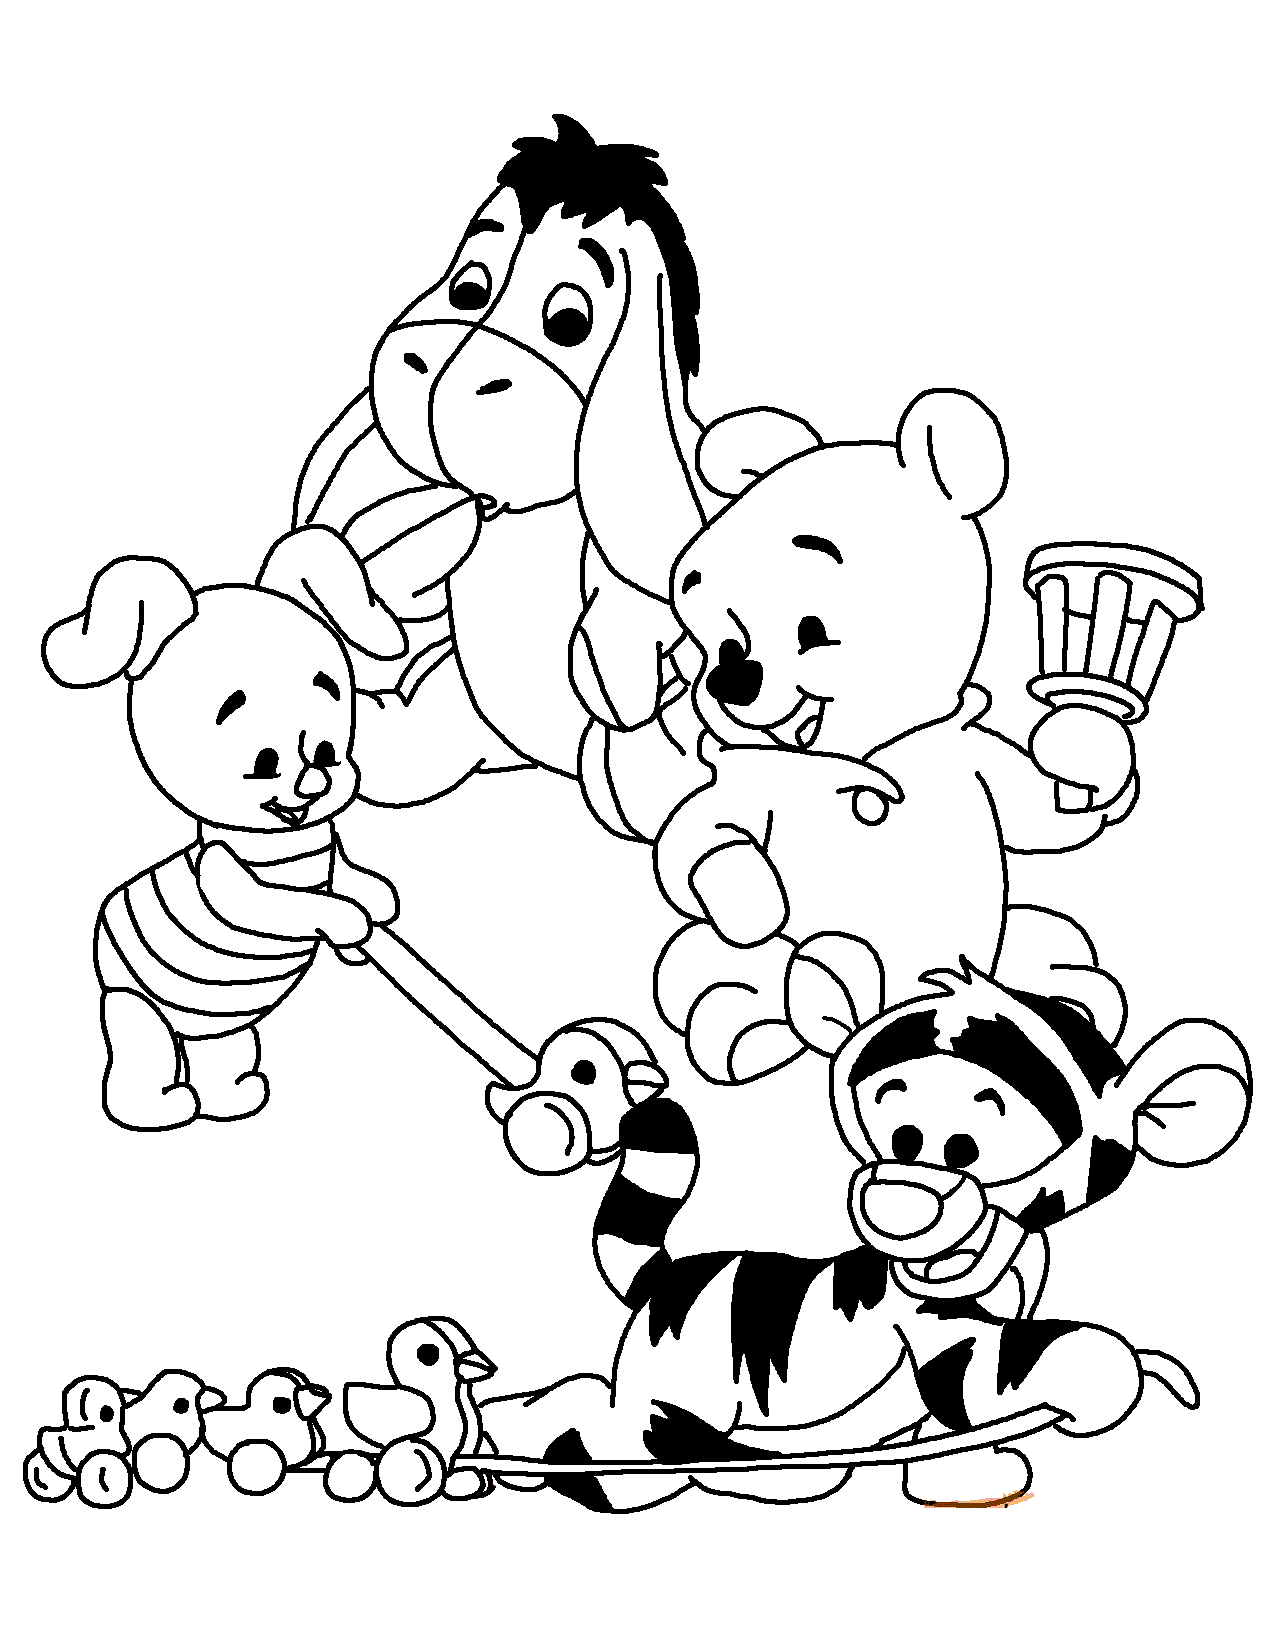 Baby Winnie The Pooh With Joy For Kids Coloring Page